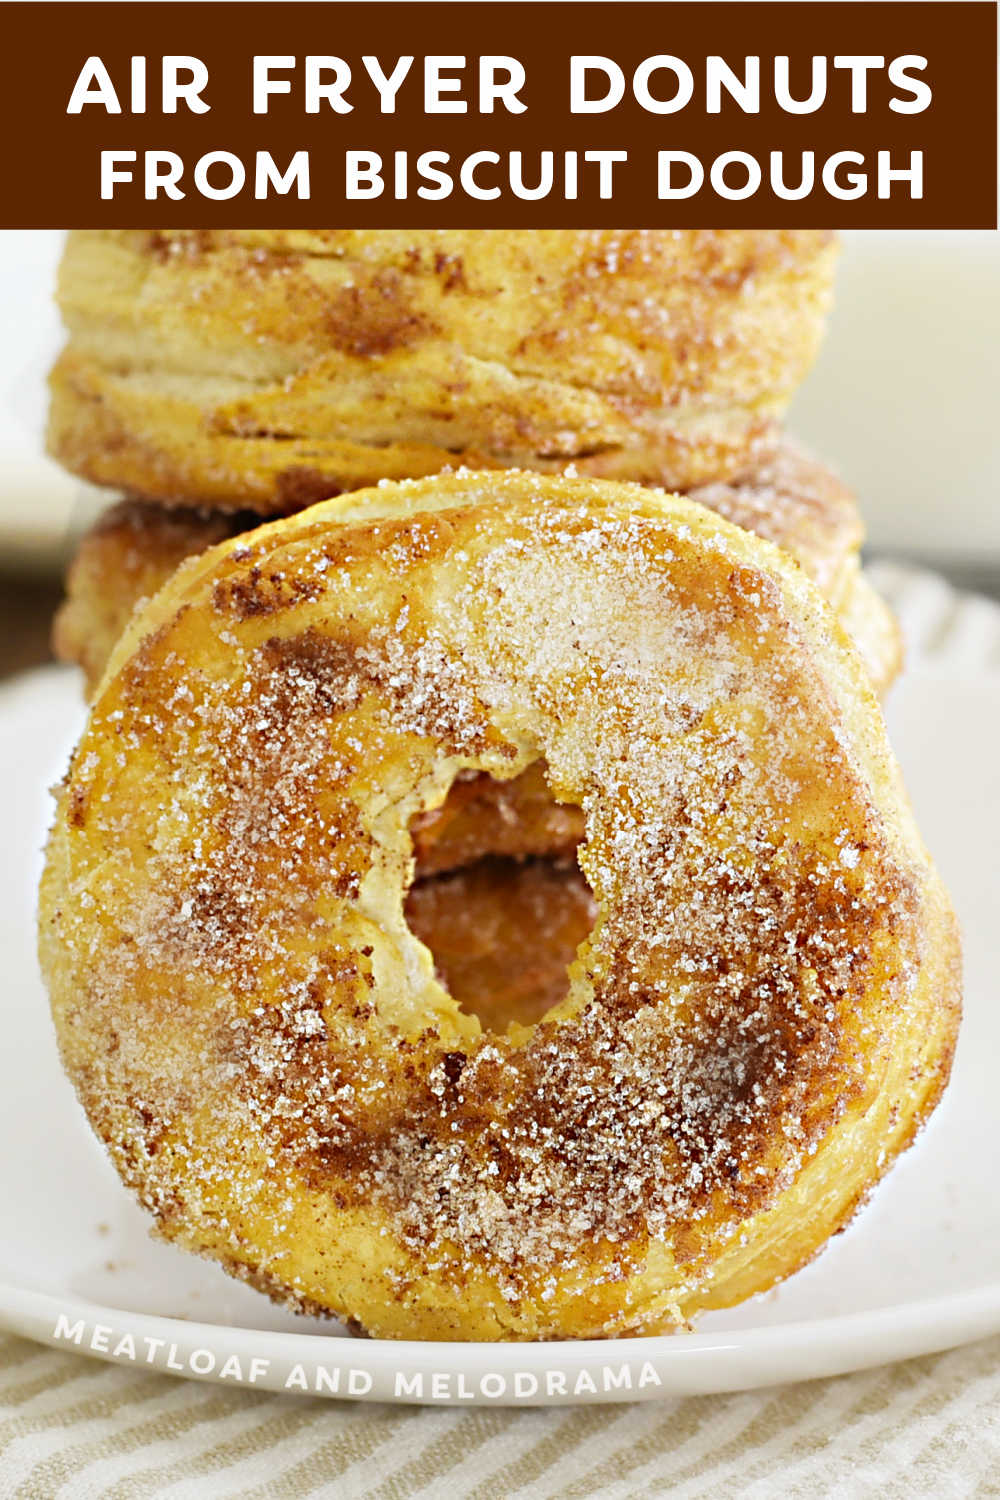 Easy Air Fryer Biscuit Donuts made with Pillsbury Grands canned biscuits and rolled in cinnamon sugar are ready in minutes! A quick and easy donut recipe for Instant air fryer, Ninja foodi or any basket or air fryer oven. via @meamel